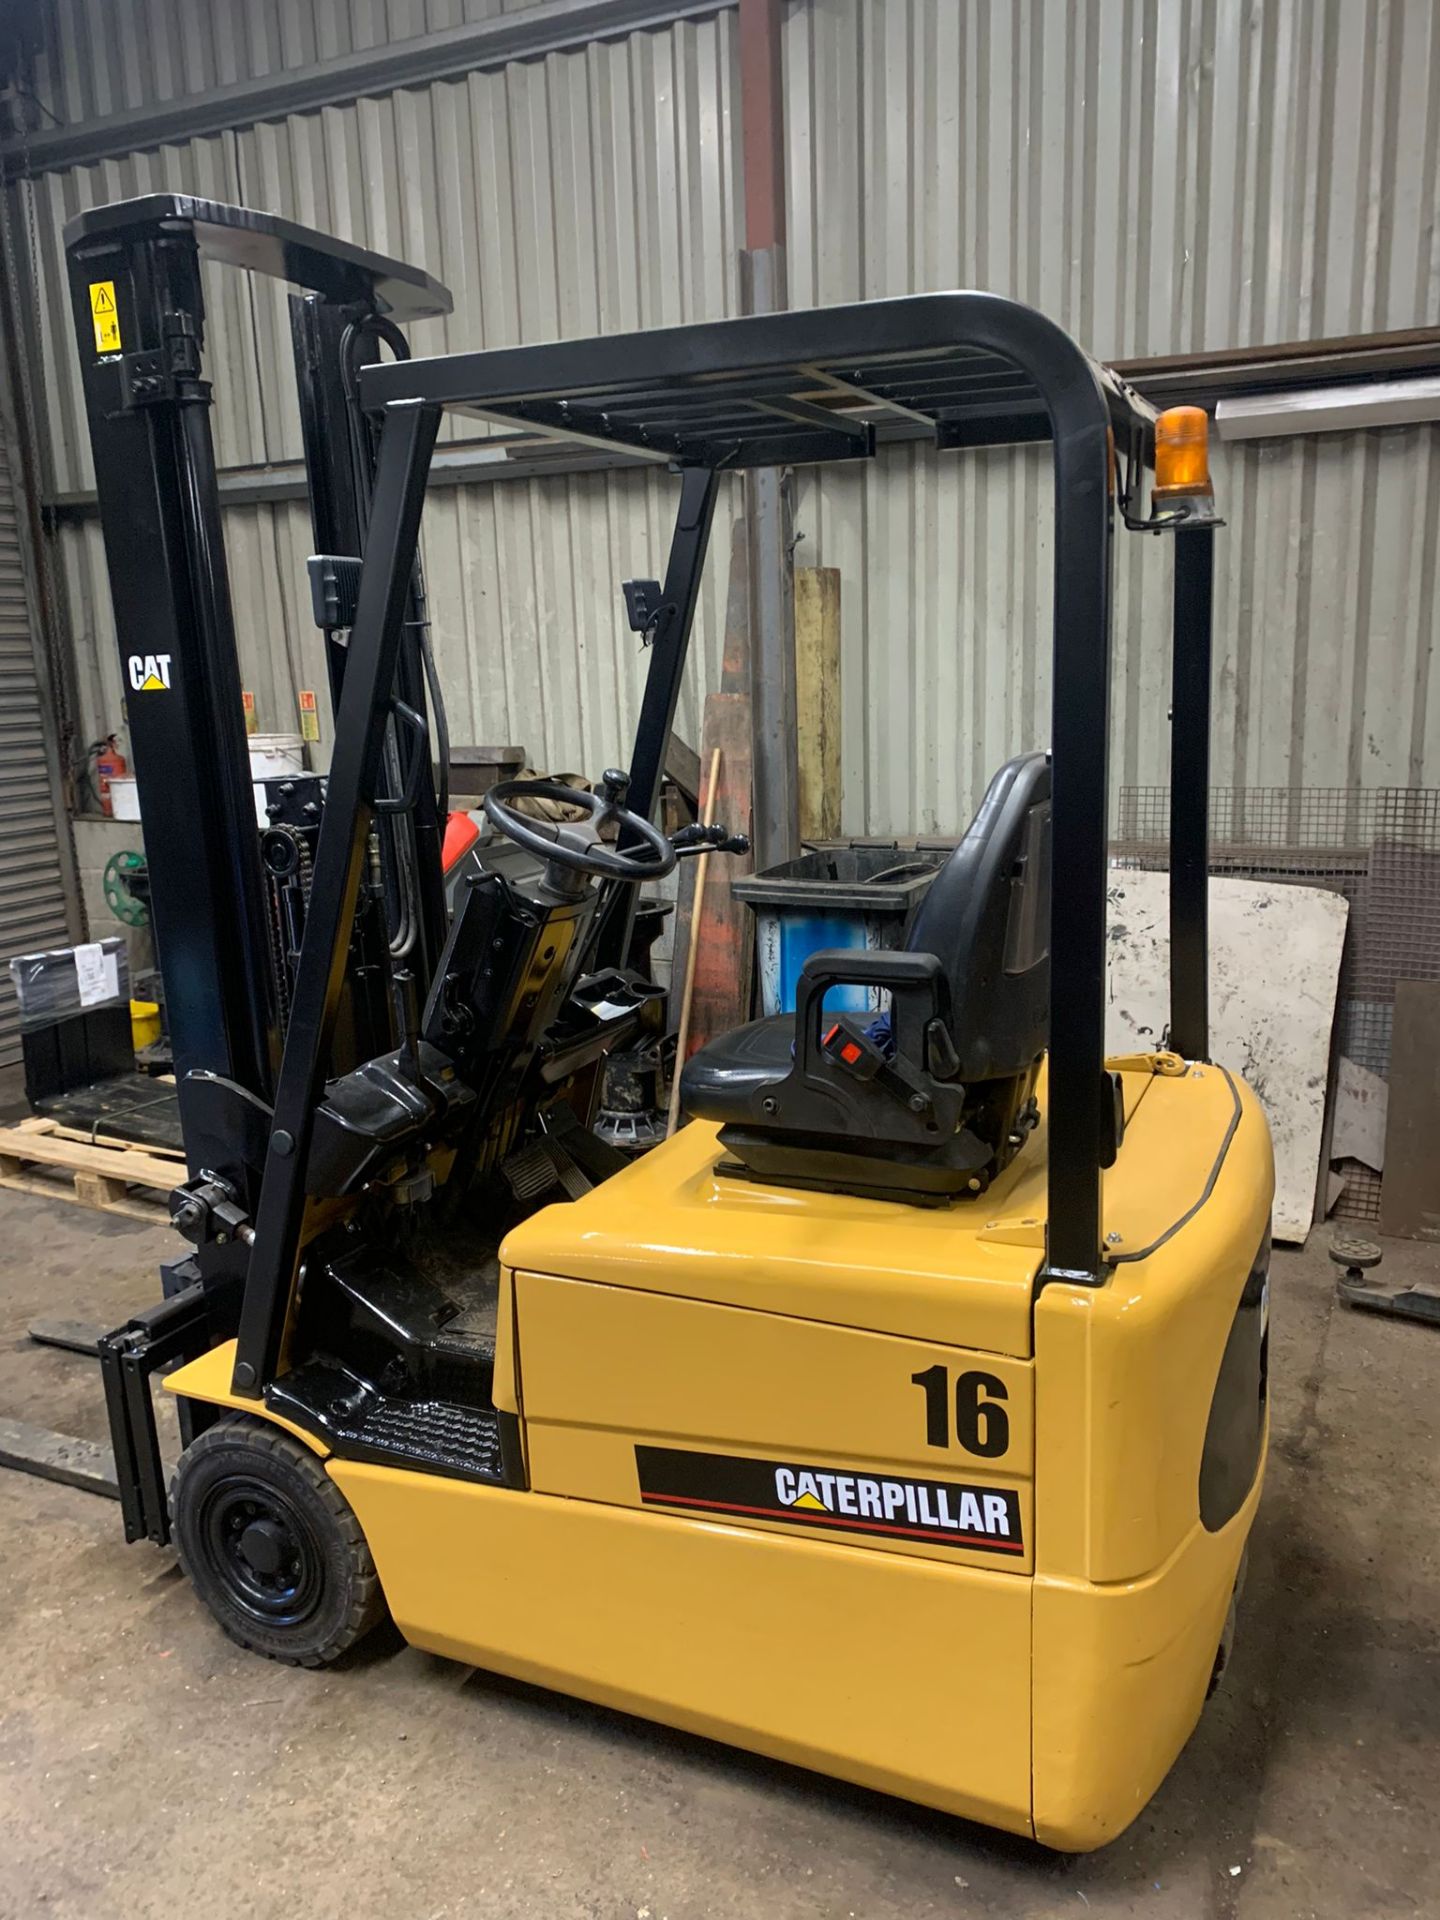 CATERPILLAR ELECTRIC FORKLIFT - Image 5 of 7